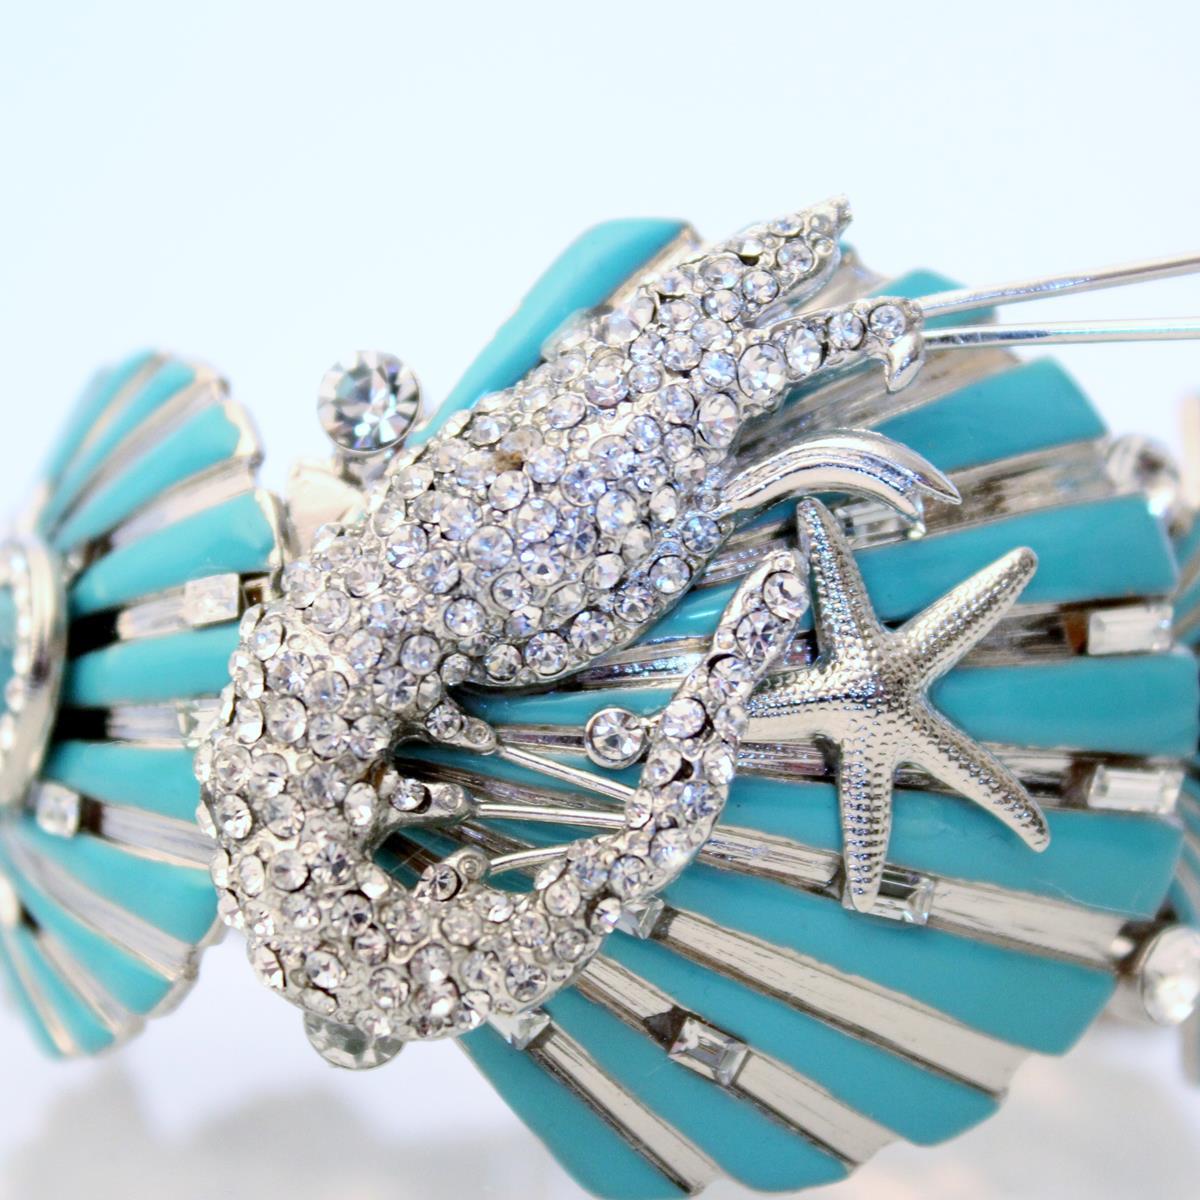 Stunning fancy piece by Carlo Zini Milano
New summer 2019 colection !
Non allergenic rhodium
Sea theme
Amazing creation of swarovski crystals, rhinestones and resins
17 Cm wrist (6.69 inches)
100% Artisanal work
Made in Milano
Worldwide express